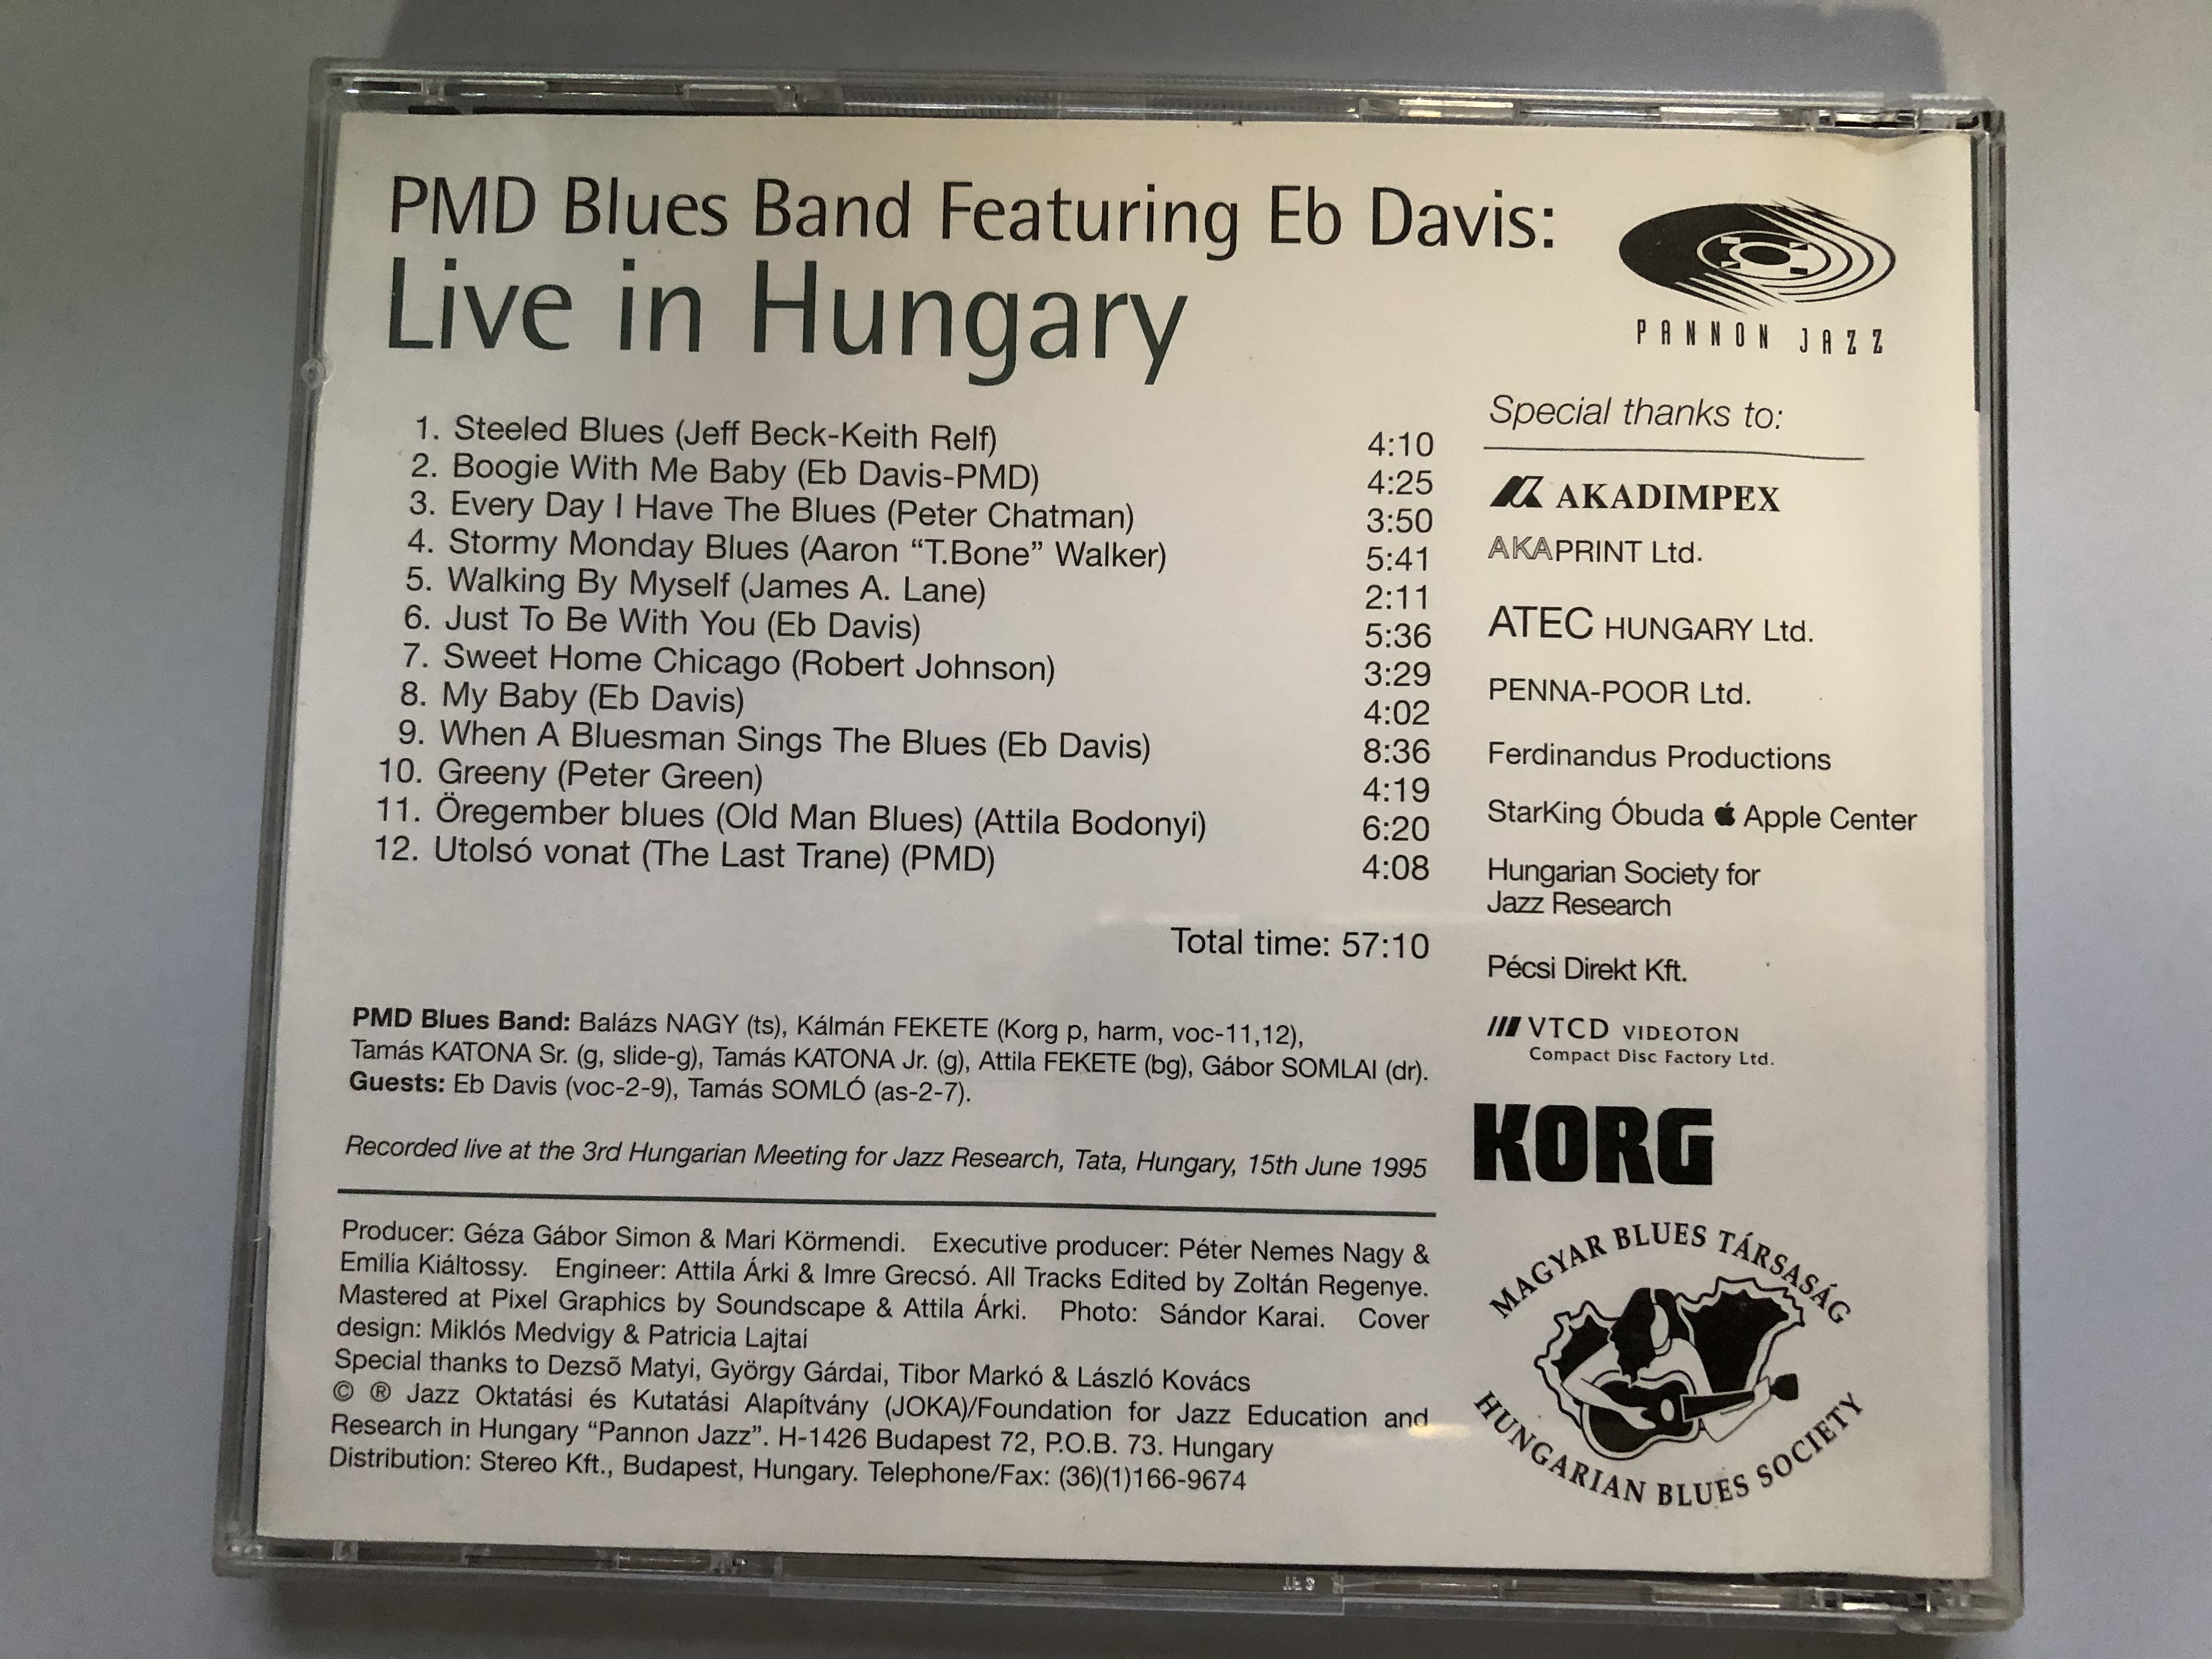 pmd-blues-band-featuring-eb-davis-live-in-hungary-foundation-for-jazz-education-and-research-in-hungary-presents-first-time-pannon-jazz-audio-cd-1996-pj-1014-5-.jpg